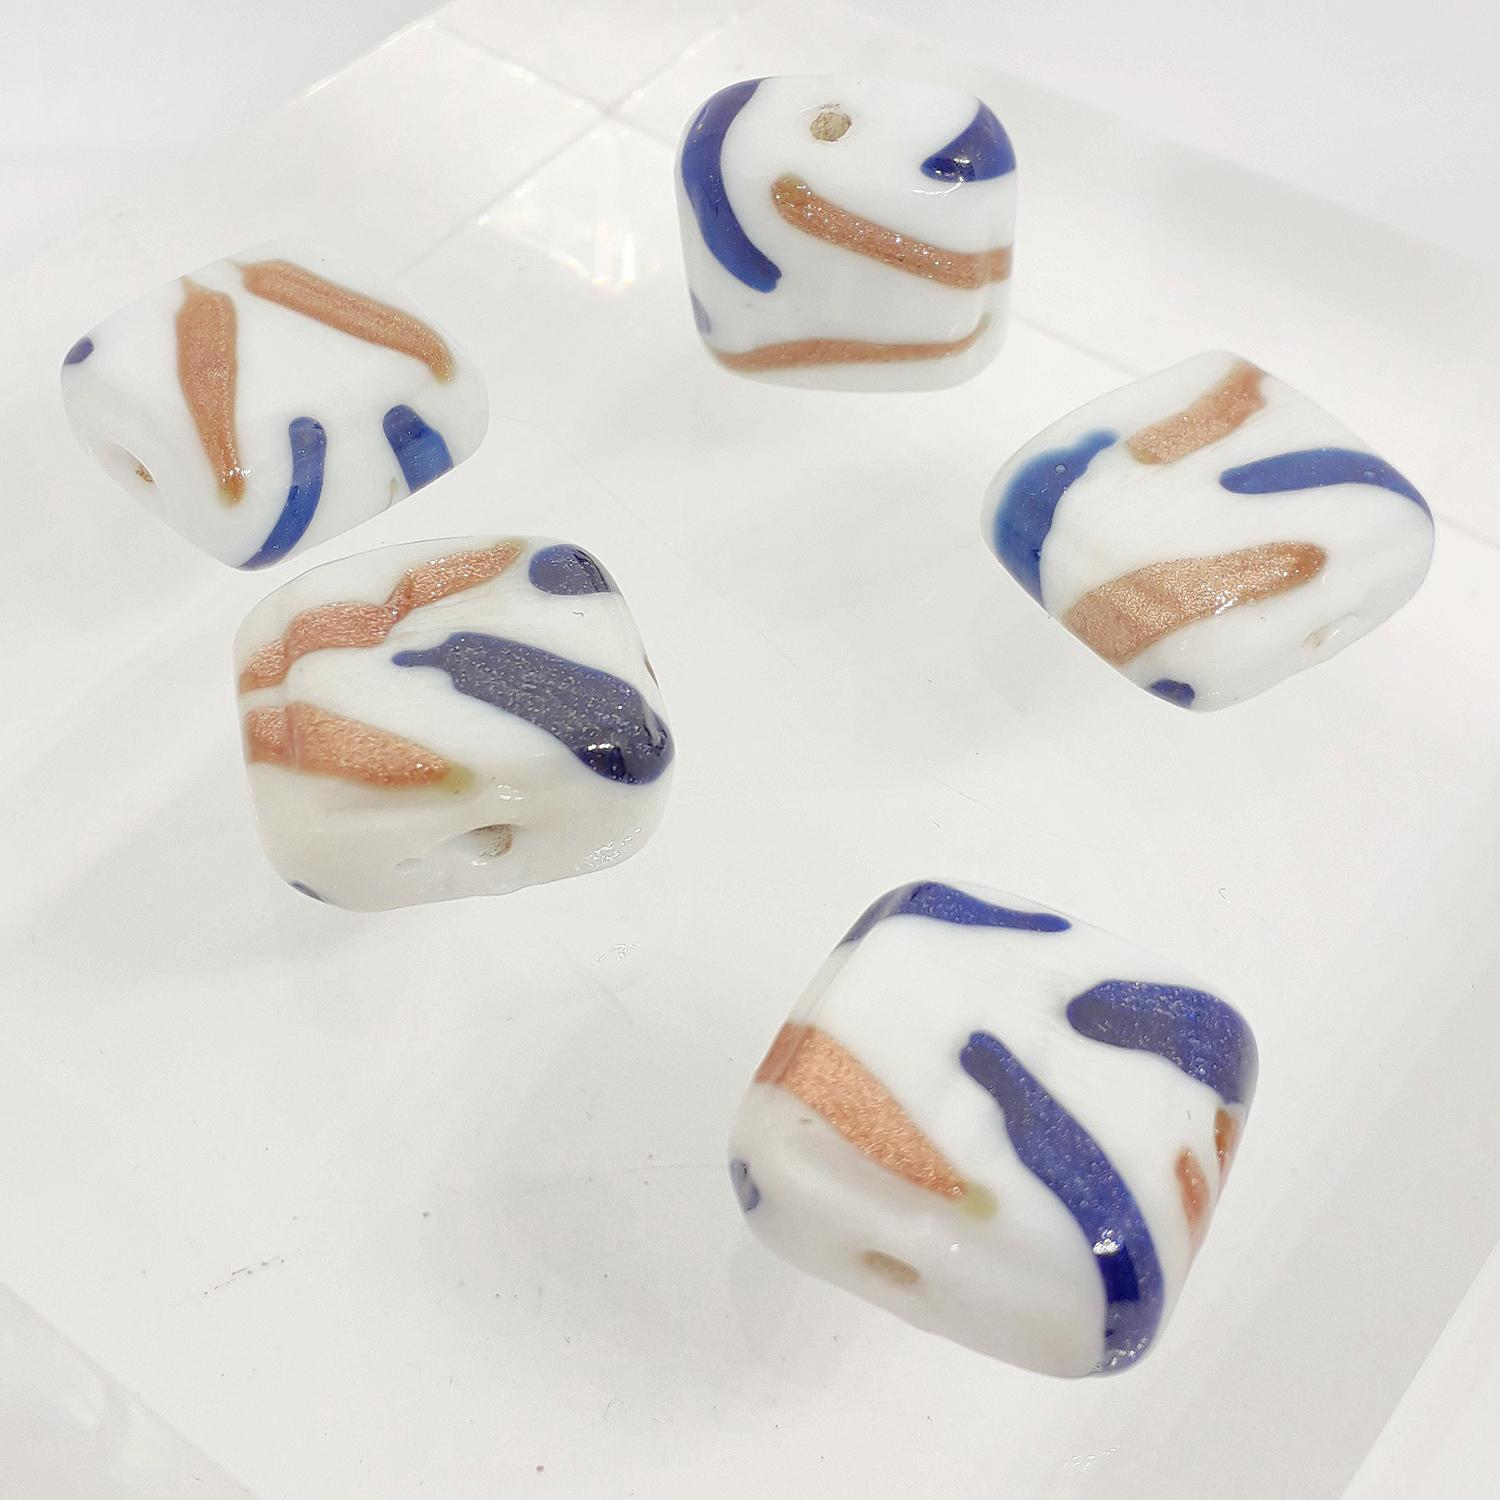 17mm White Glass Square Bead with Gold Shimmer and Navy Blue Stripes